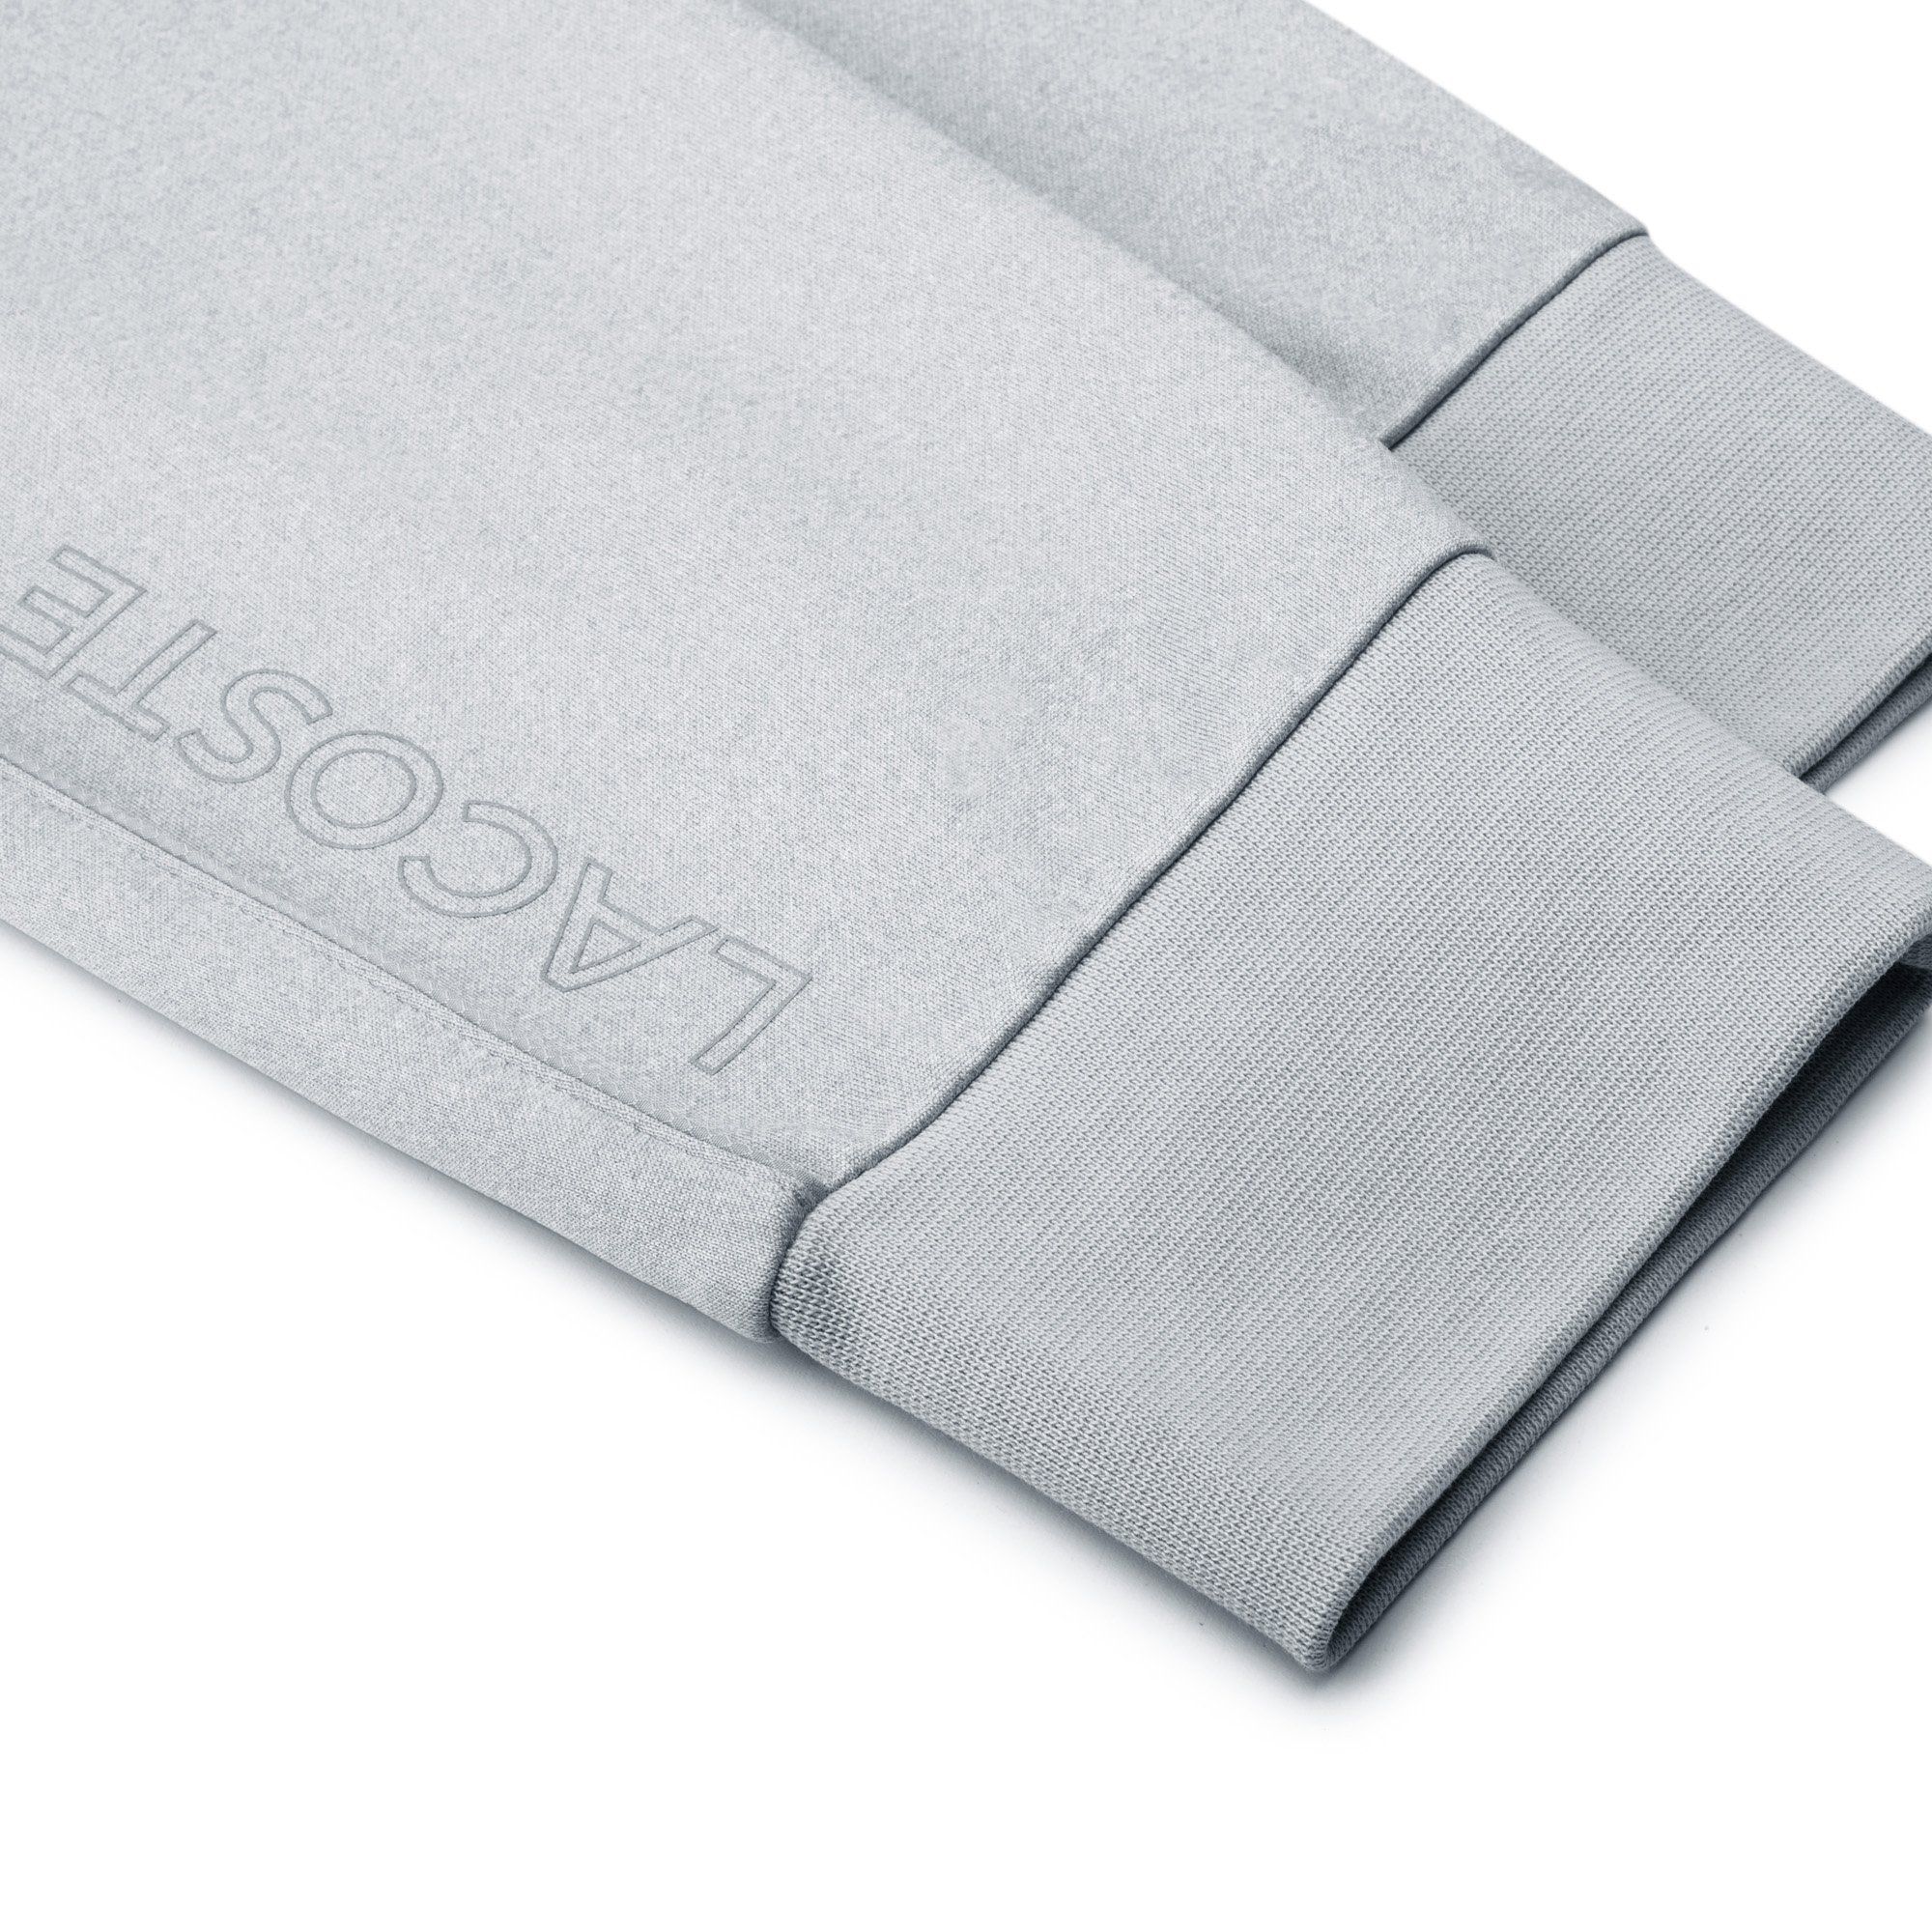 Smooth Poly Fleece Fabric
Soft Feel
Elasticated Waistband with Drawcords
Two Side Pockets
Tapered Cuffs
Lacoste Croc Logo on Thigh
Reflective Lacoste Branding on Leg
Standard Fit
Machine Washable
100% Polyester